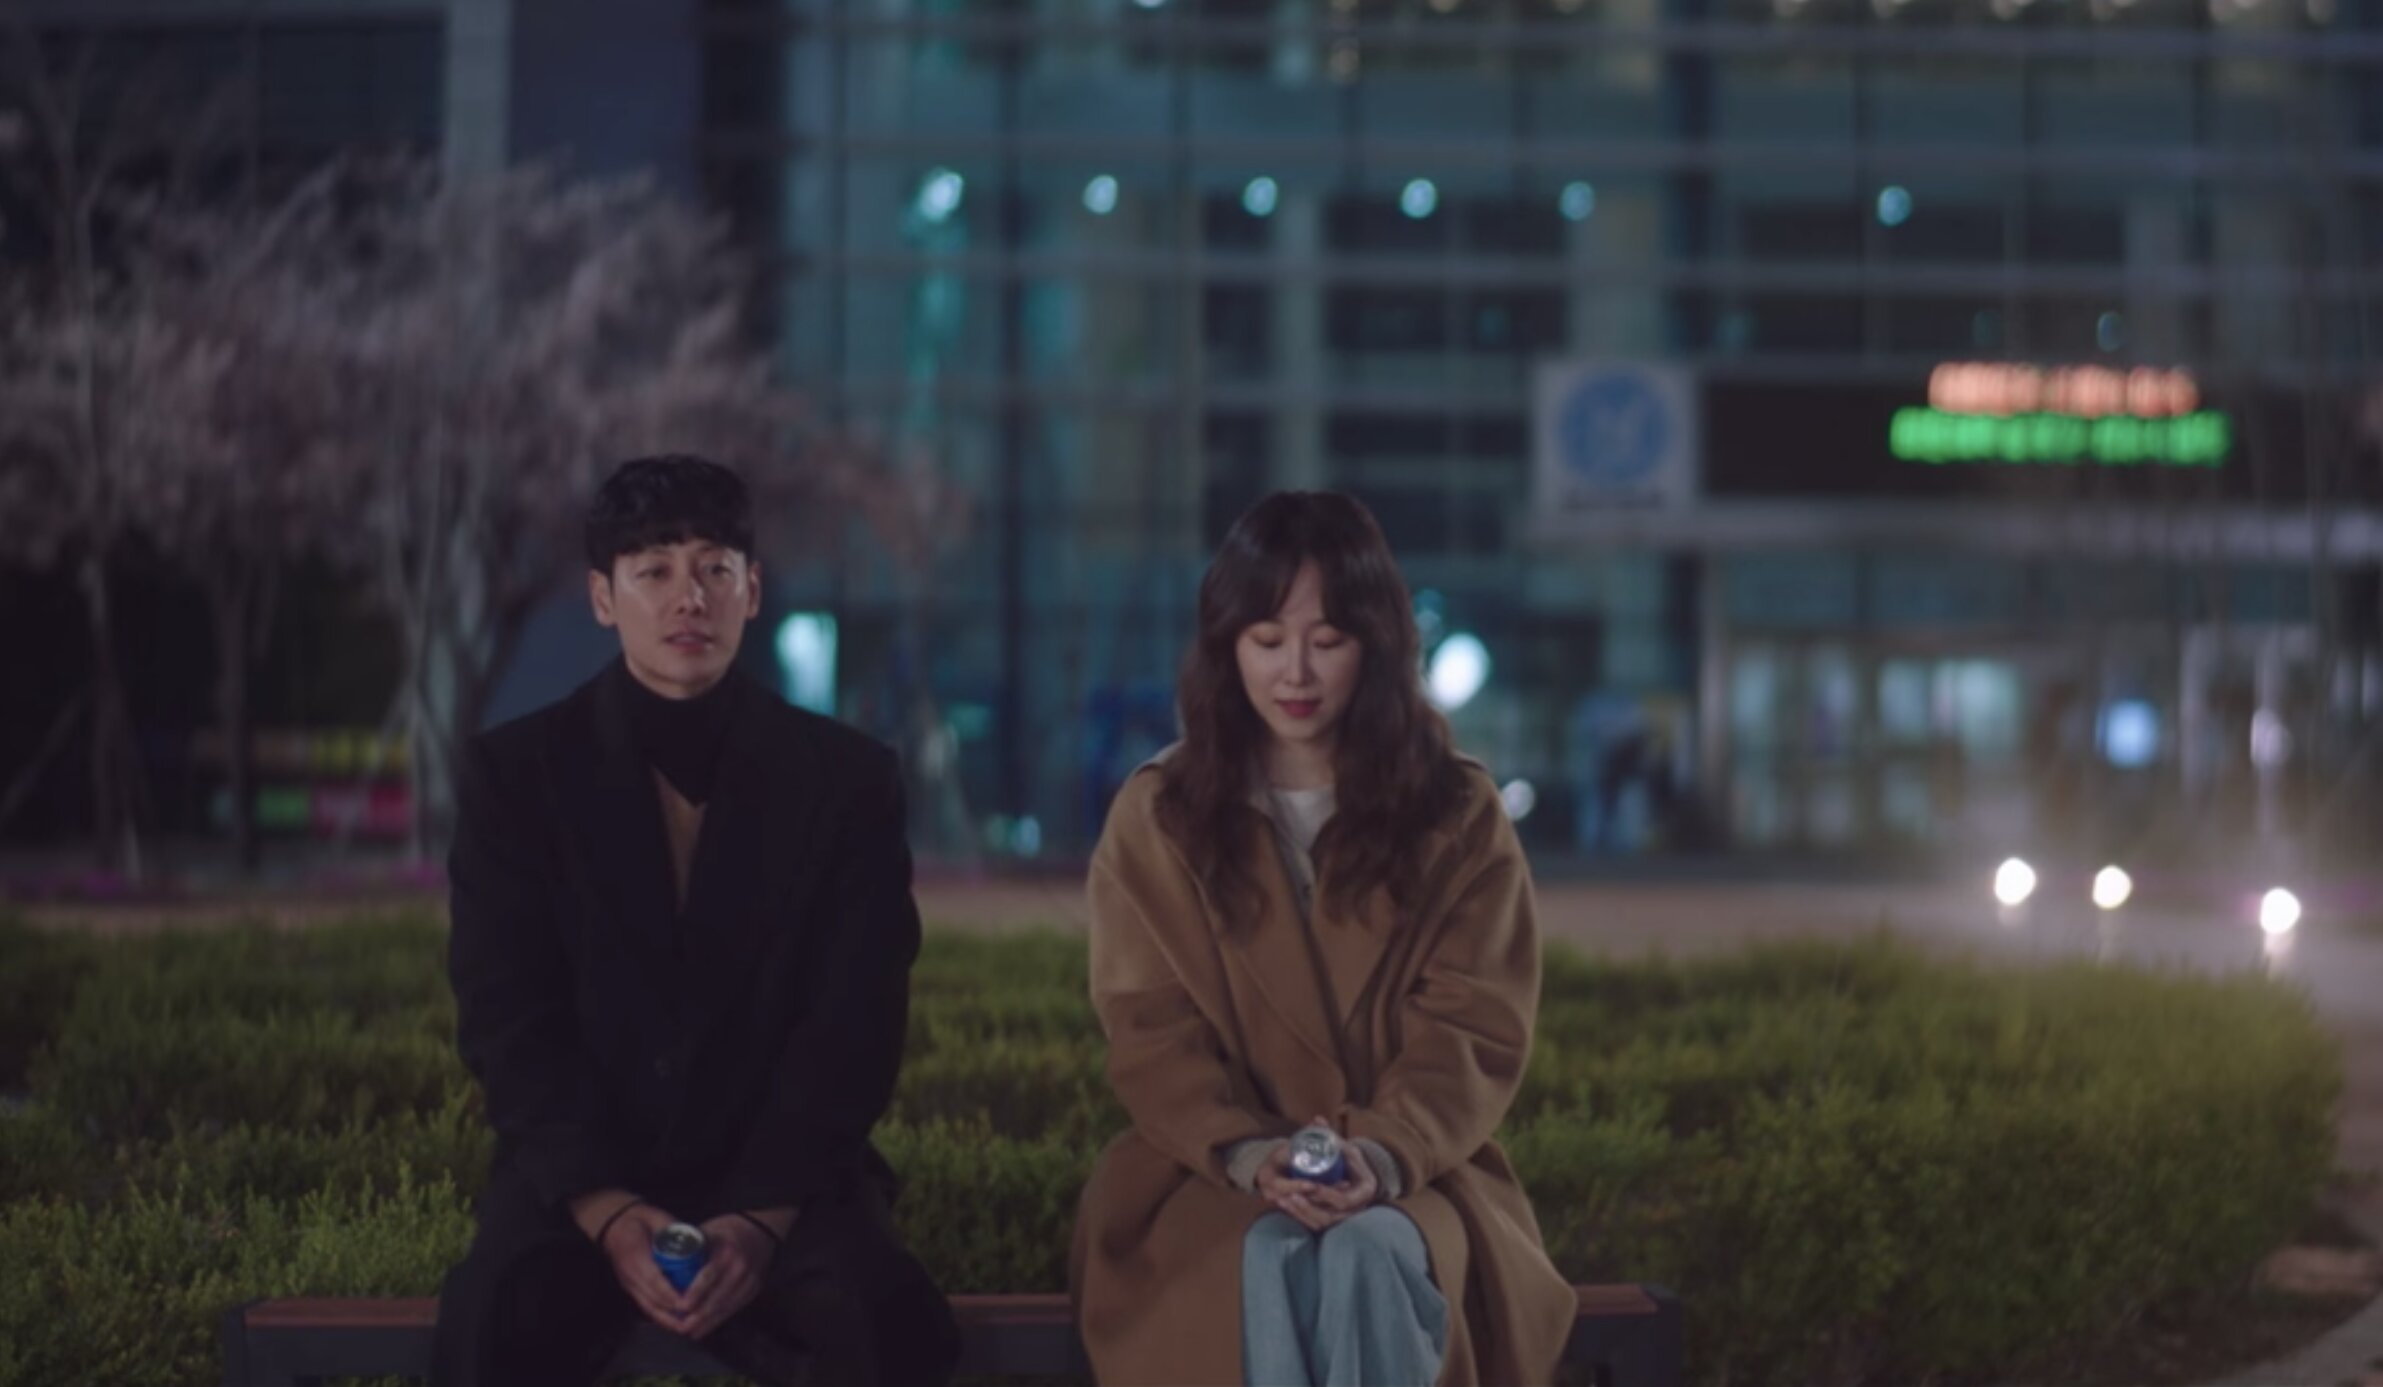 You Are My Spring Episode 13 Release Date, Preview, And Where To Watch